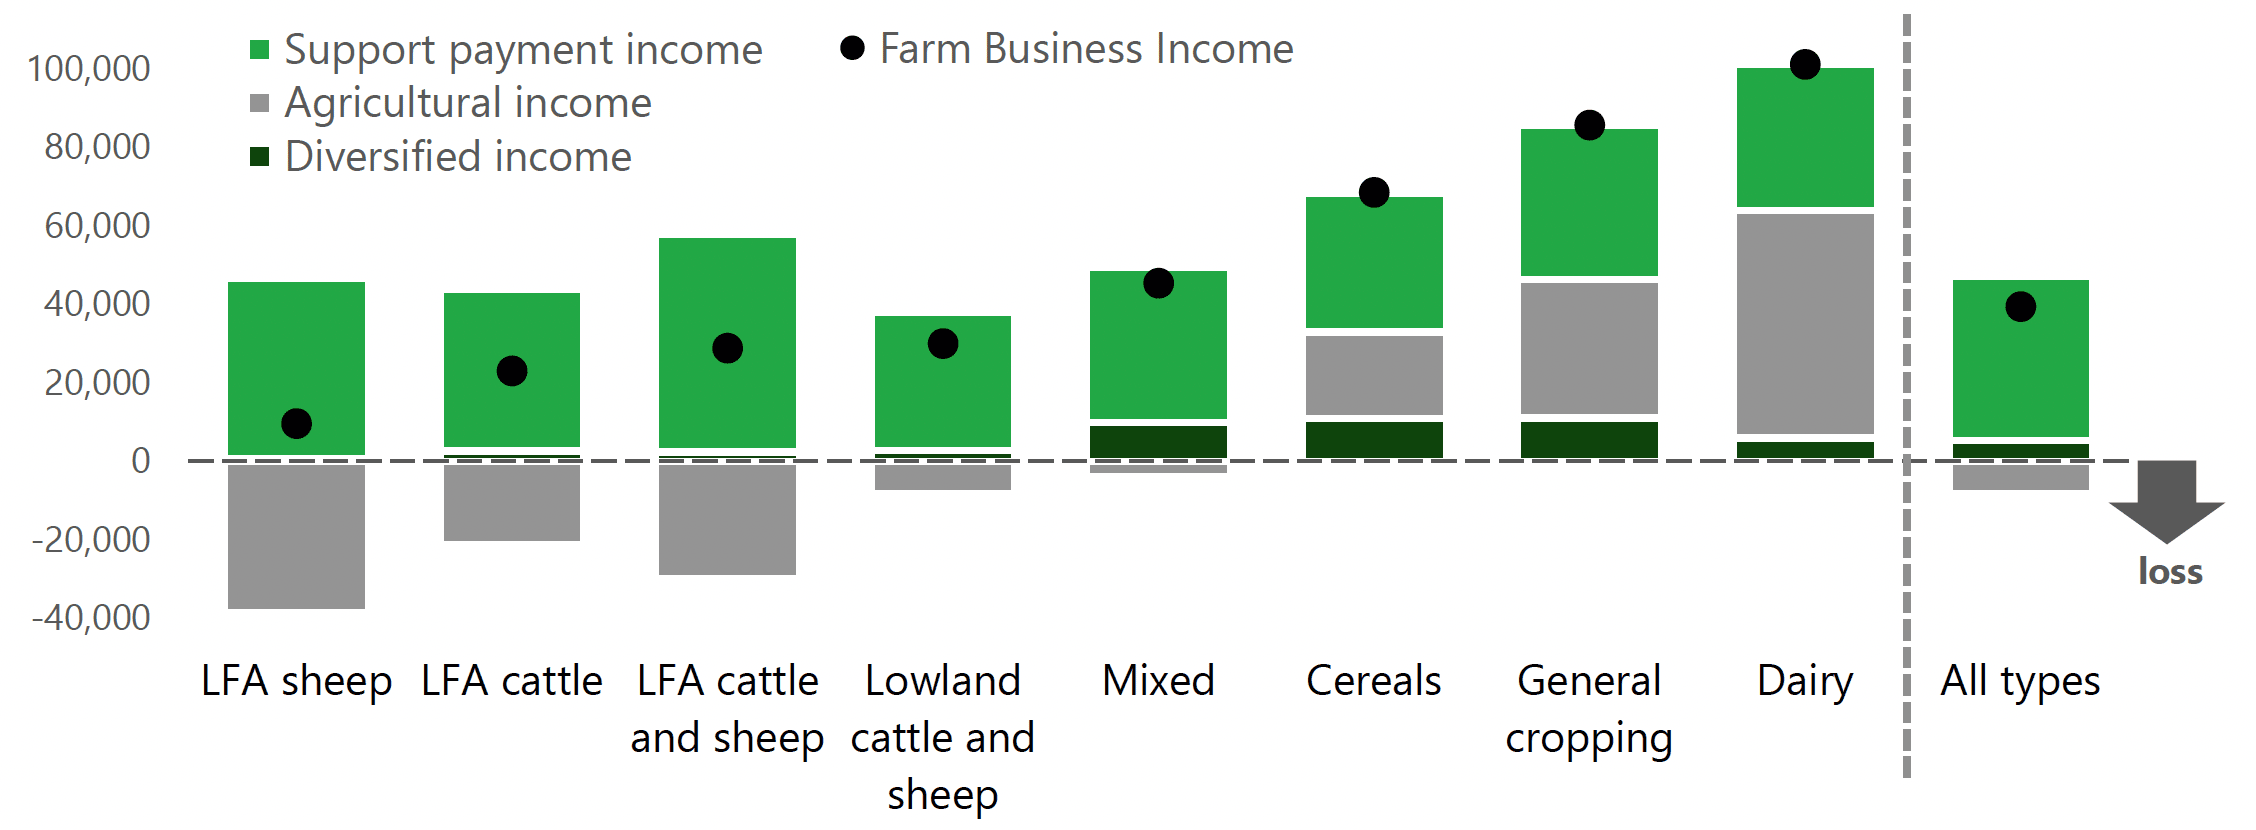 A stacked bar chart shows the contributions to average farm income from support payments, agricultural income and diversified income, for different farm types.